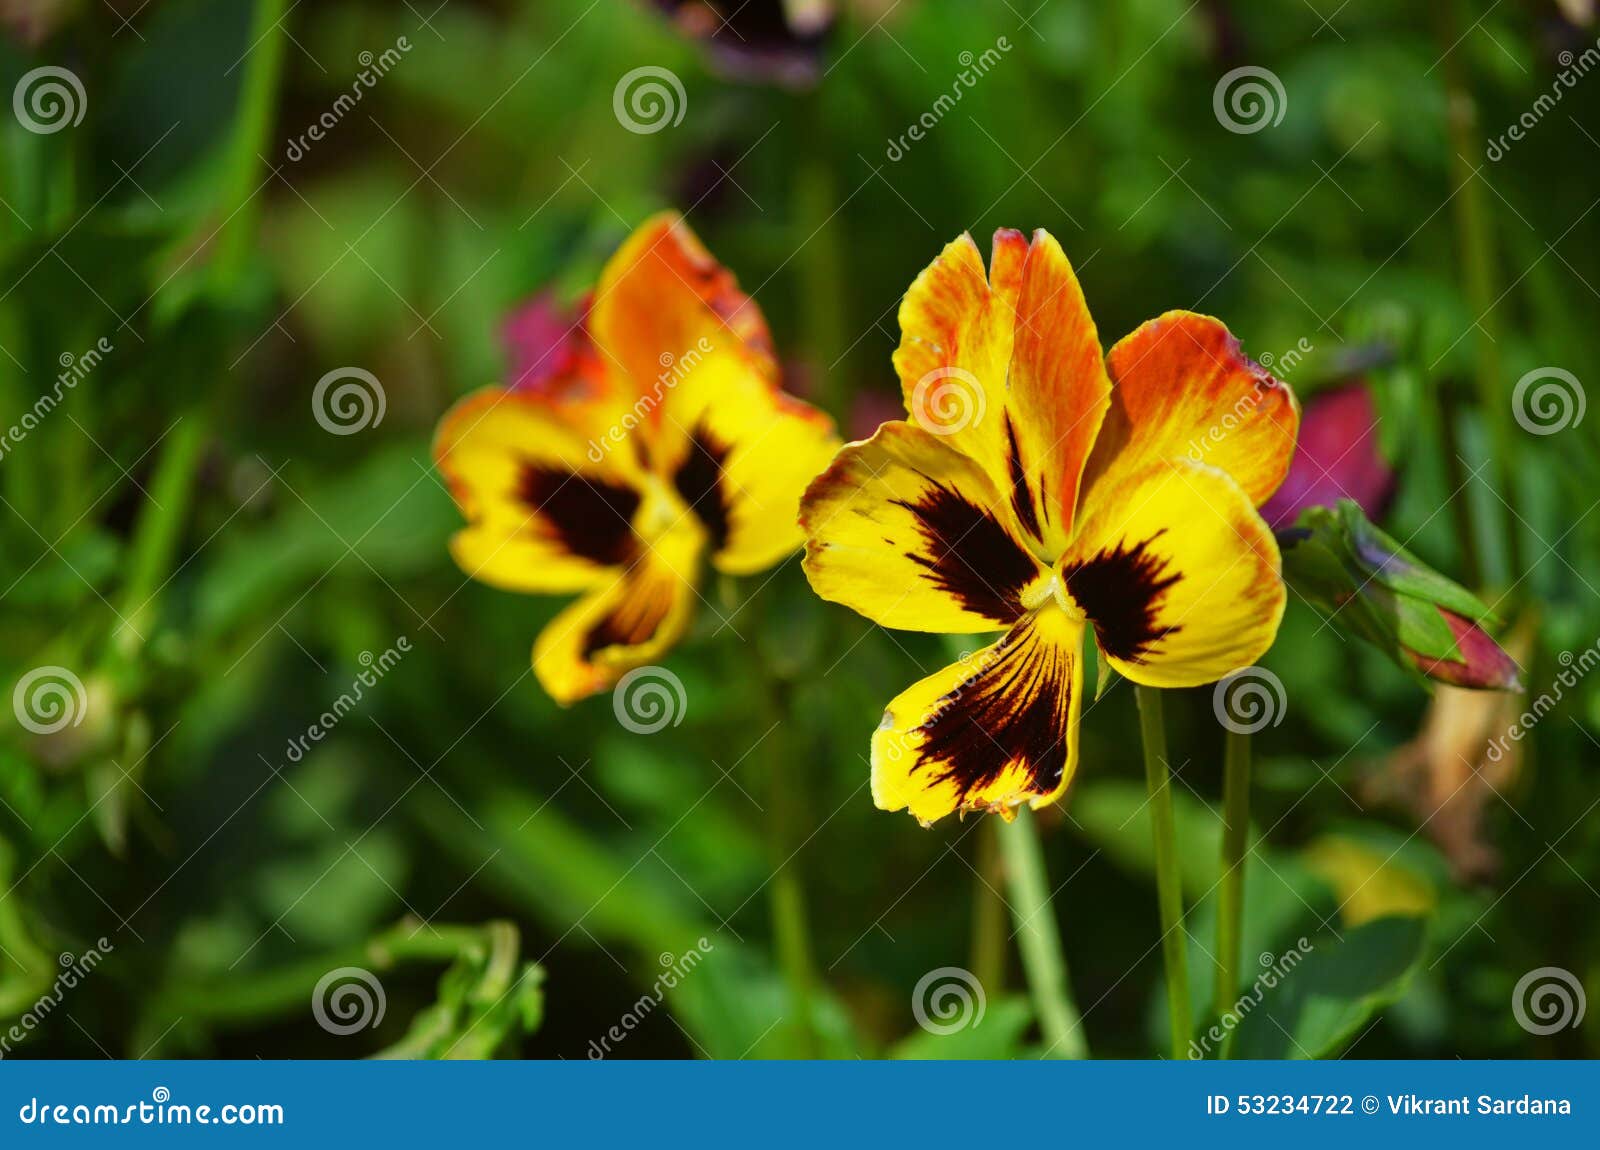 Pansy flowers stock photo. Image of nadu, nature, tamil - 11